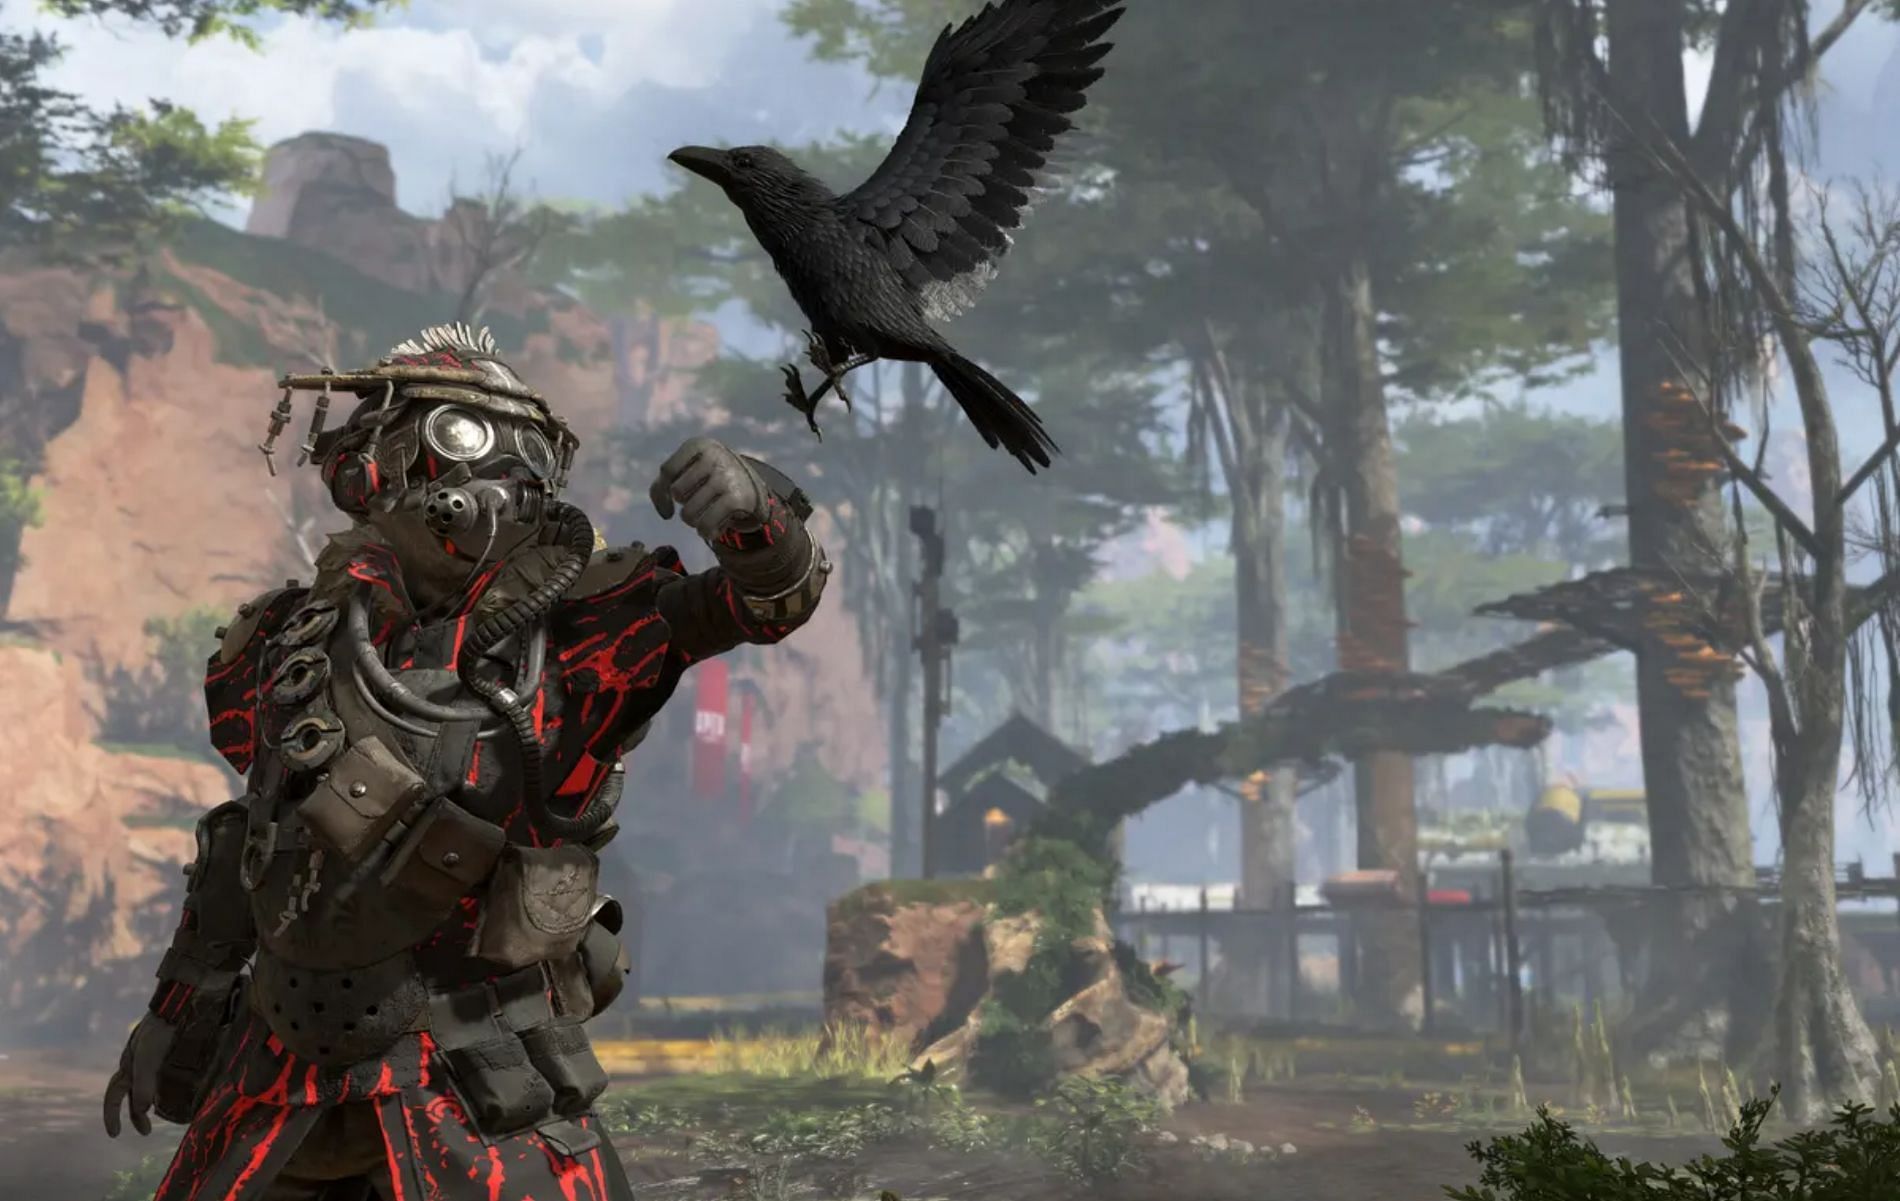 Apex Legends update 2.05 (September 20) patch notes: New Collection Event, additional quality-of-life improvements, and more